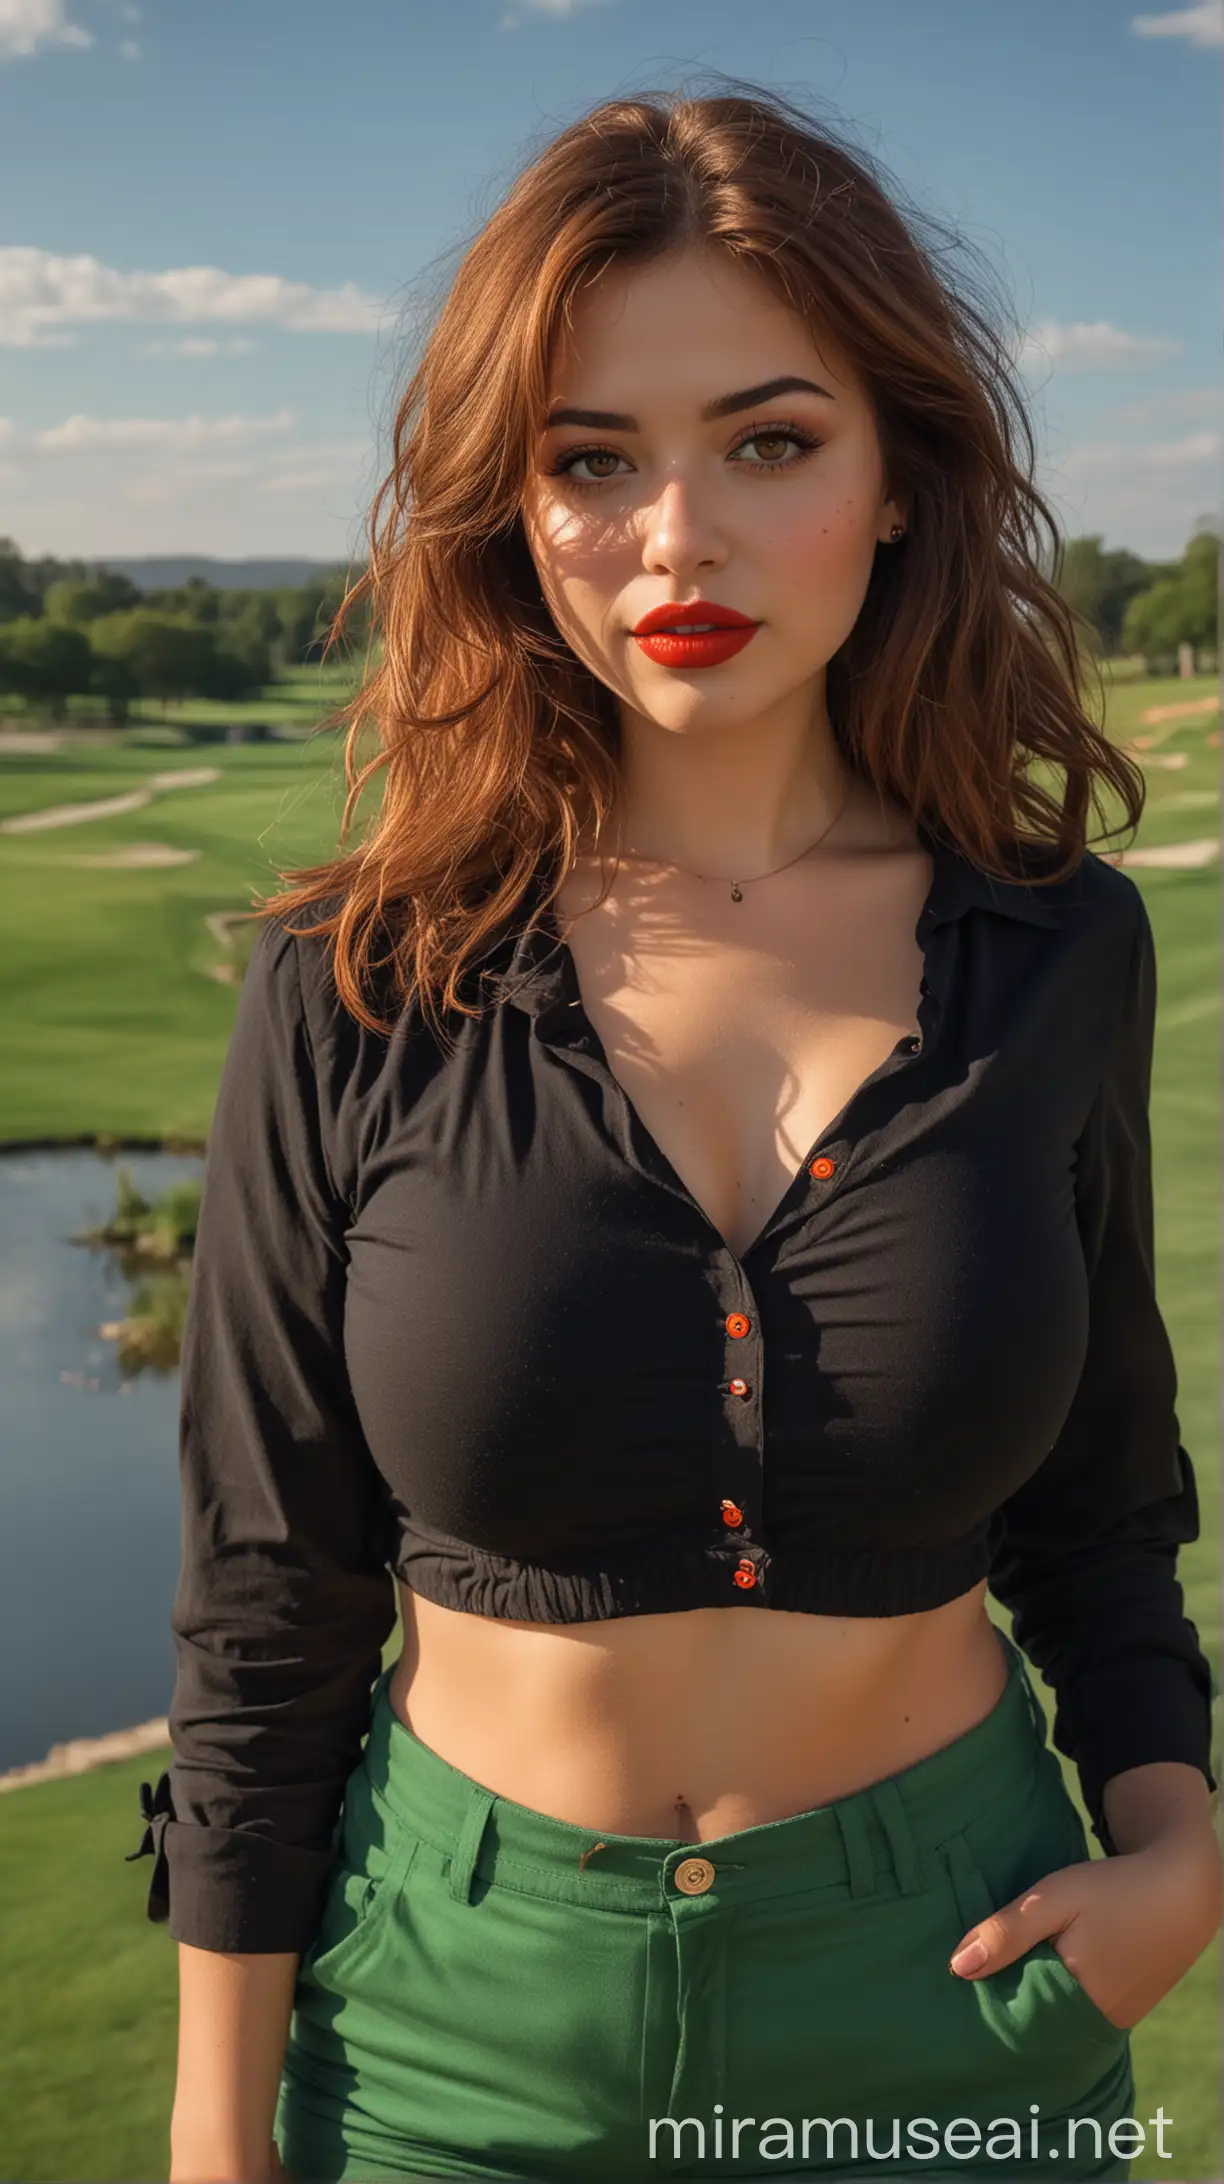 Stylish Curvy Woman with Nose Ring and Ear Tops in Hollywood Lakes Golf Club